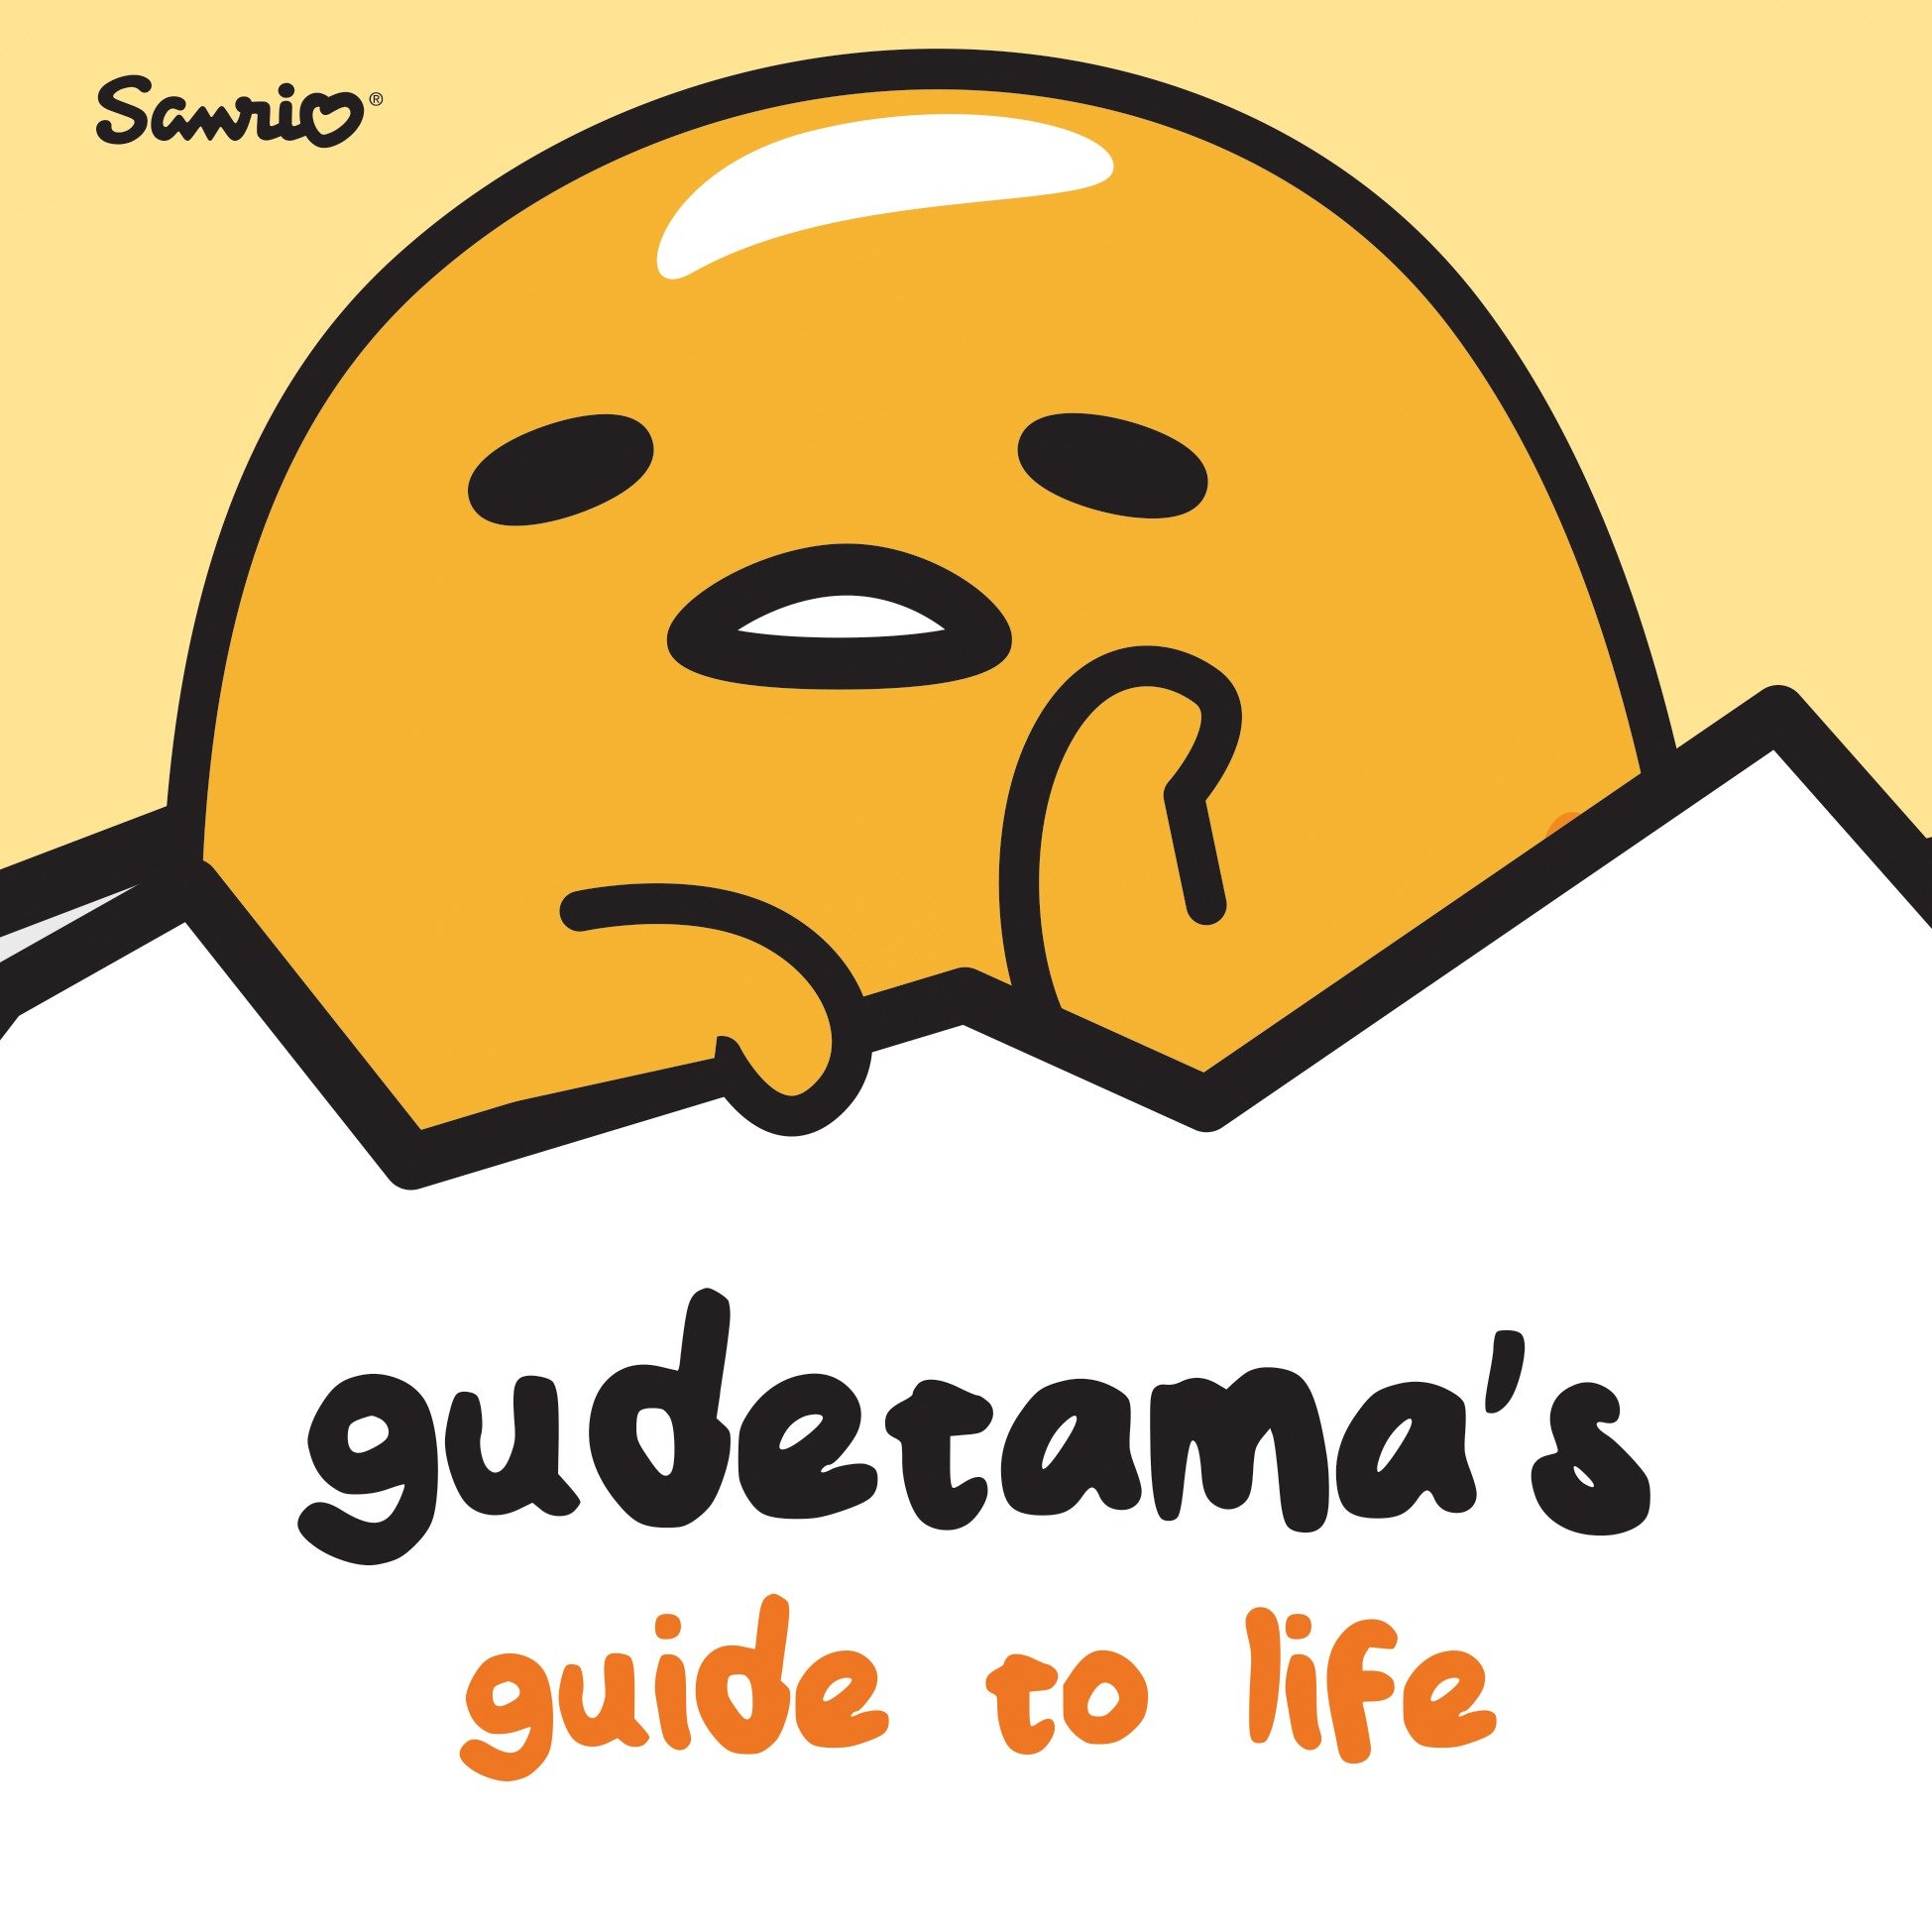 Elling　UK　Brian　Gudetama:　by　To　Worldwide　Gudetama's　by　and　Penguin　Guide　Books　Life　Ltd　published　Cult　Entertainment　Megastore